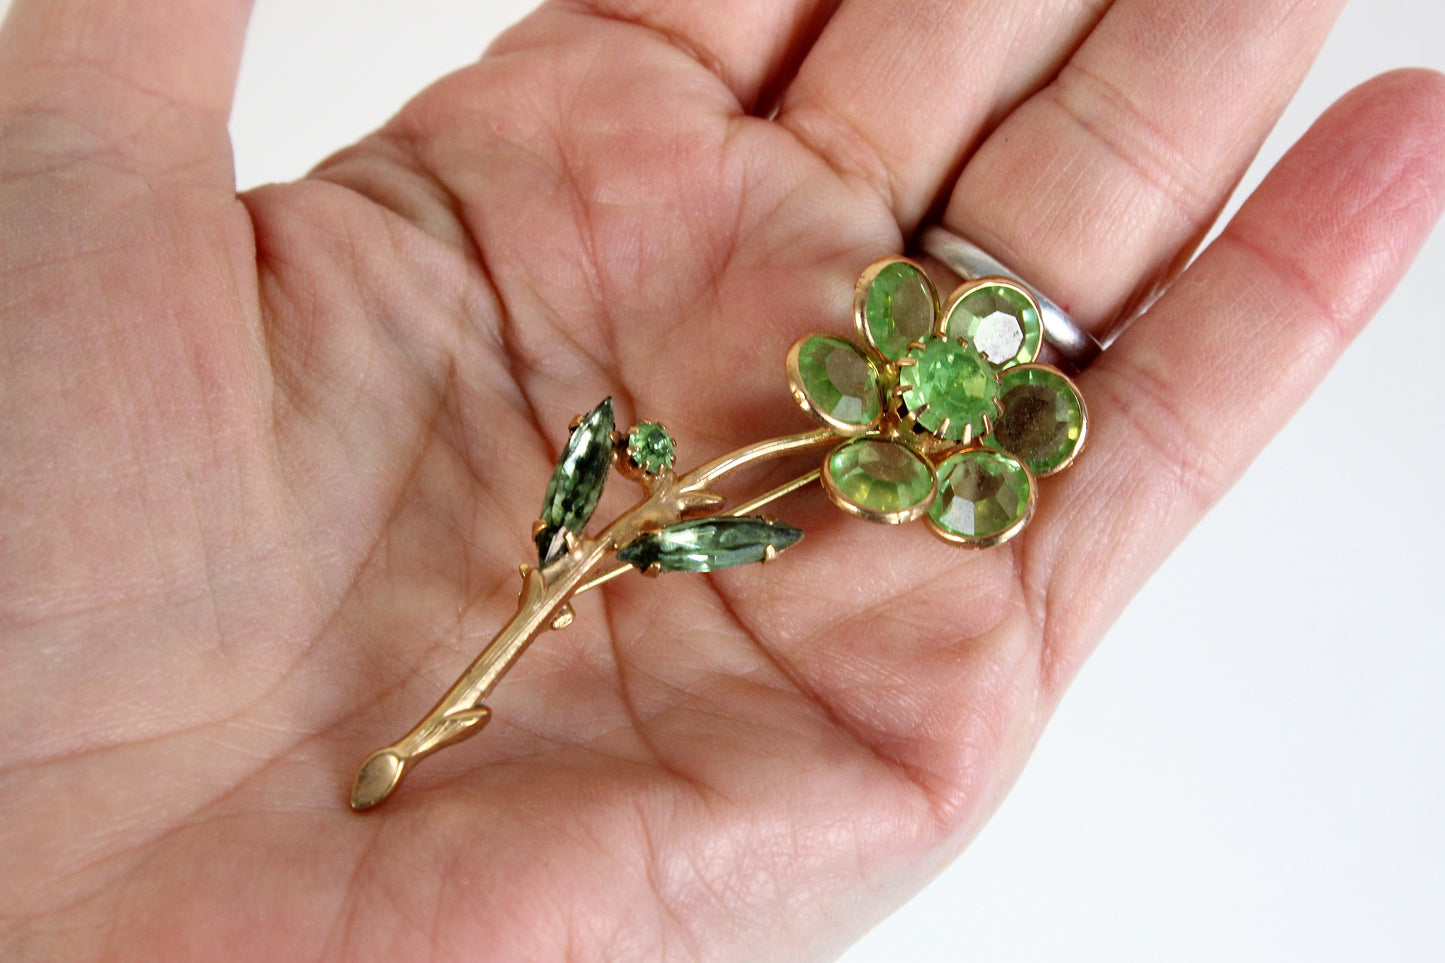 Vintage 1960s Green Glass Daisy Flower Pin